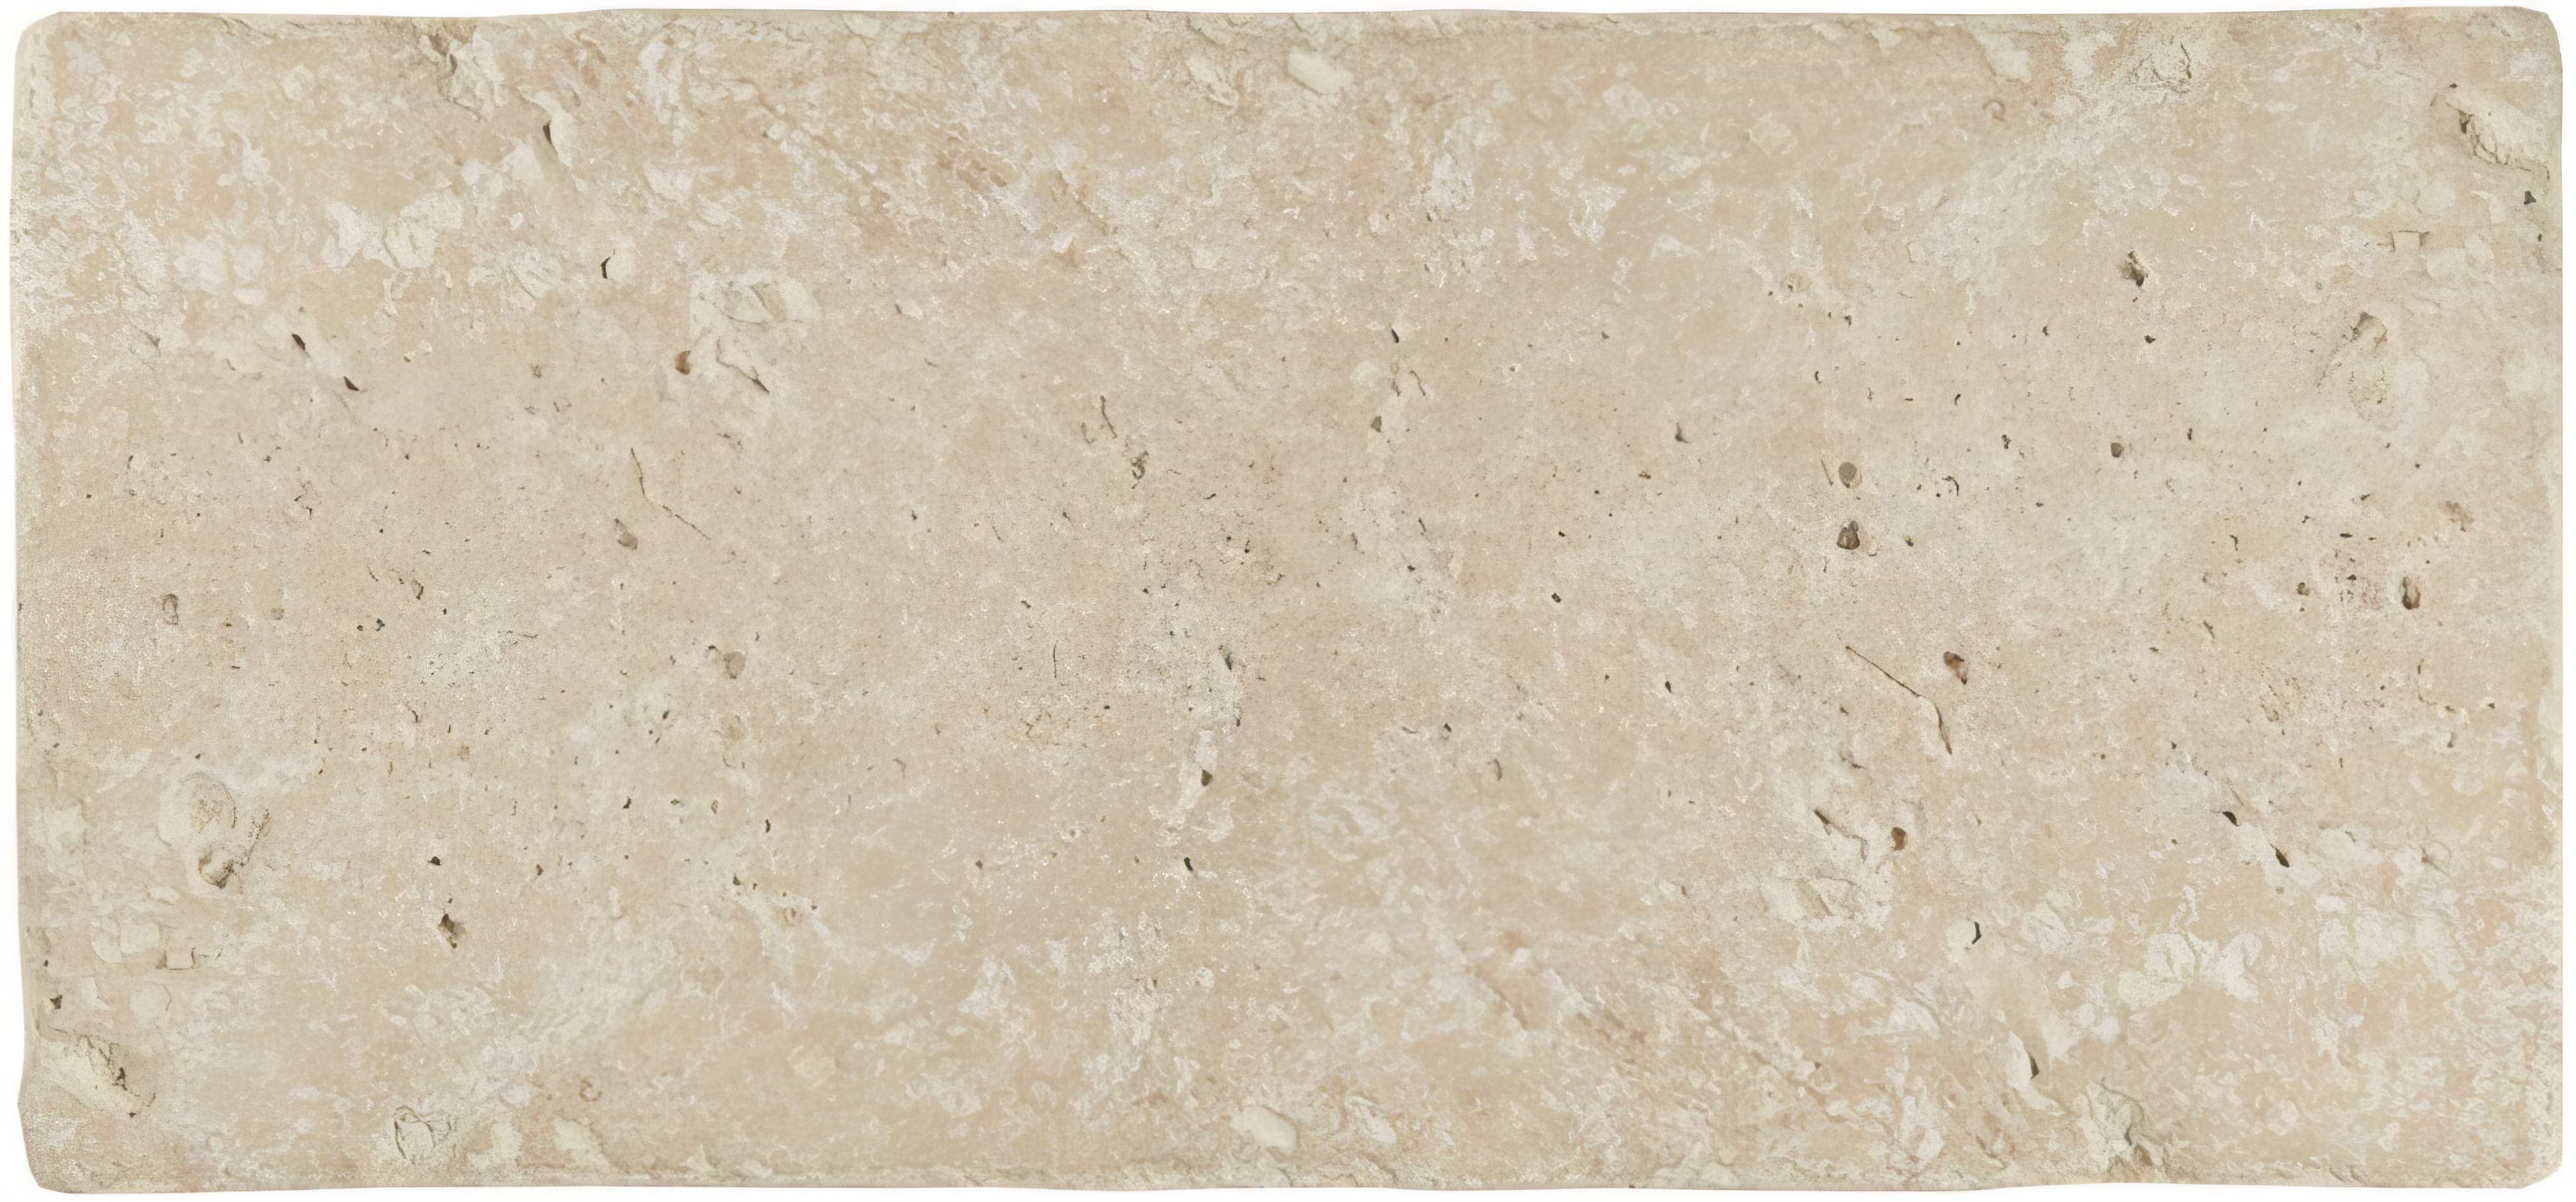 Levantine Ivory Unfilled & Tumbled Travertine 406 x 203mm - Hyperion Tiles